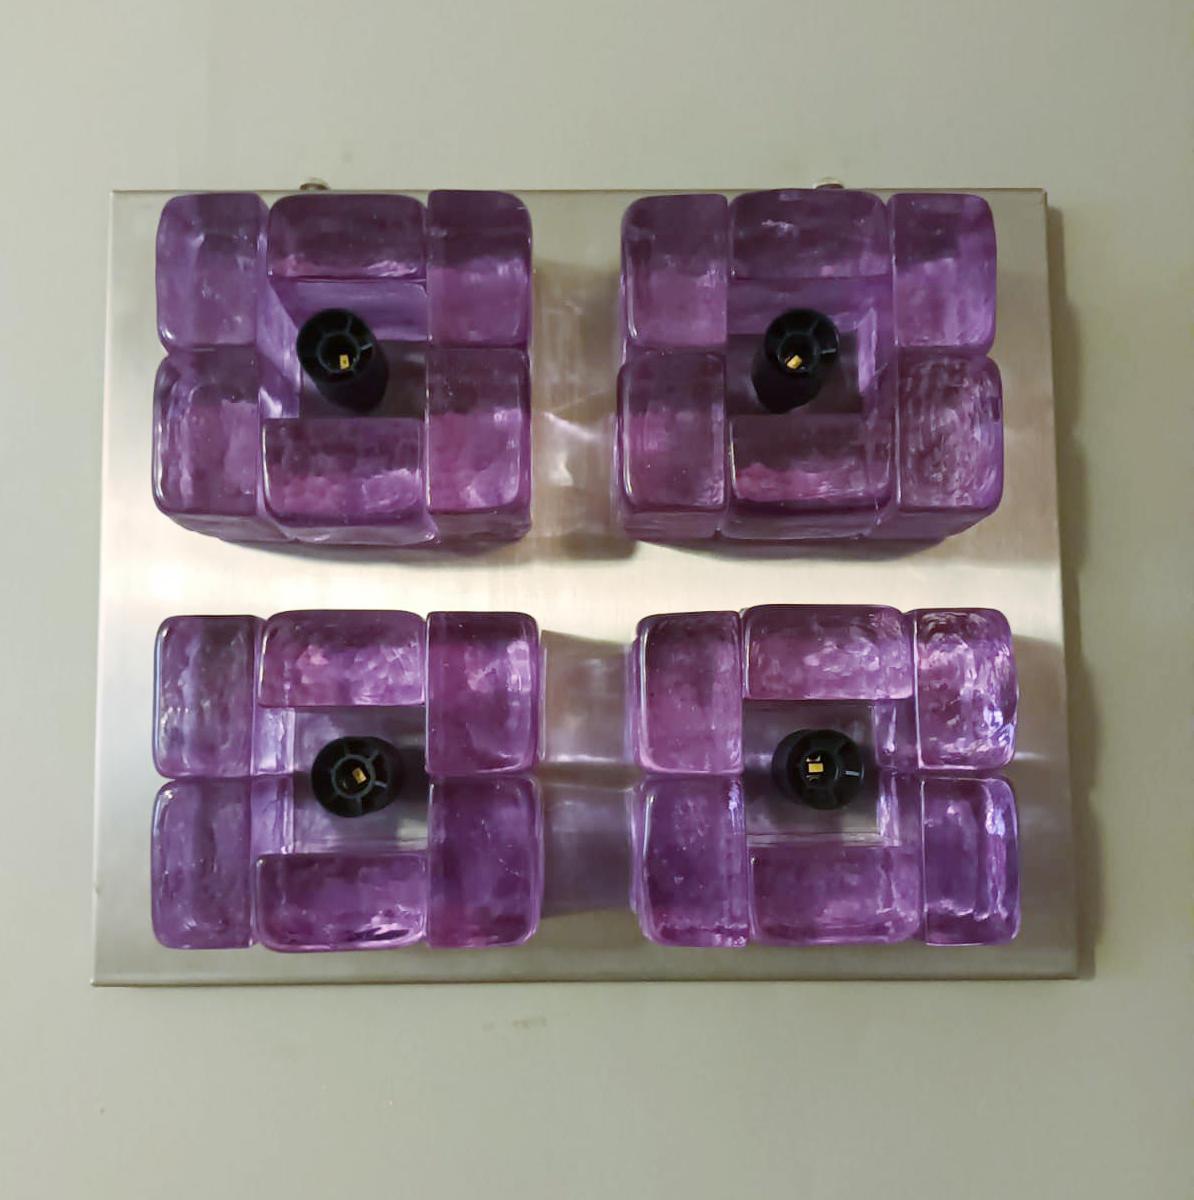 Mid-Century Modern Amethyst Cube Sconces / Flush Mounts by Poliarte - 3 Available For Sale